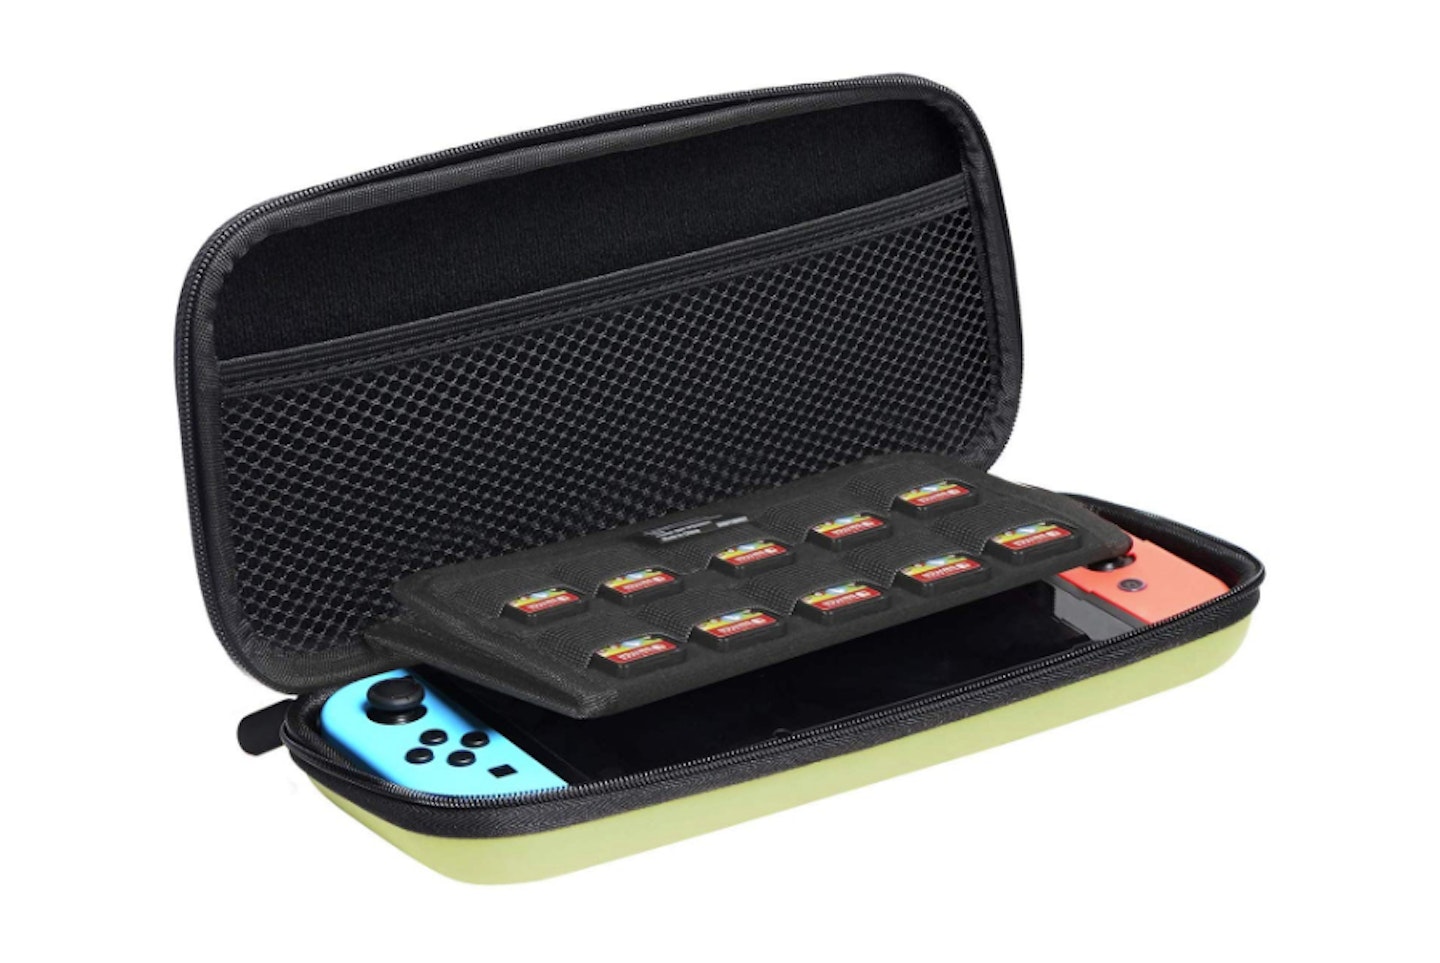 Carrying Case for Nintendo Switch, Neon Yellow, WAS £14.99 NOW £10.17